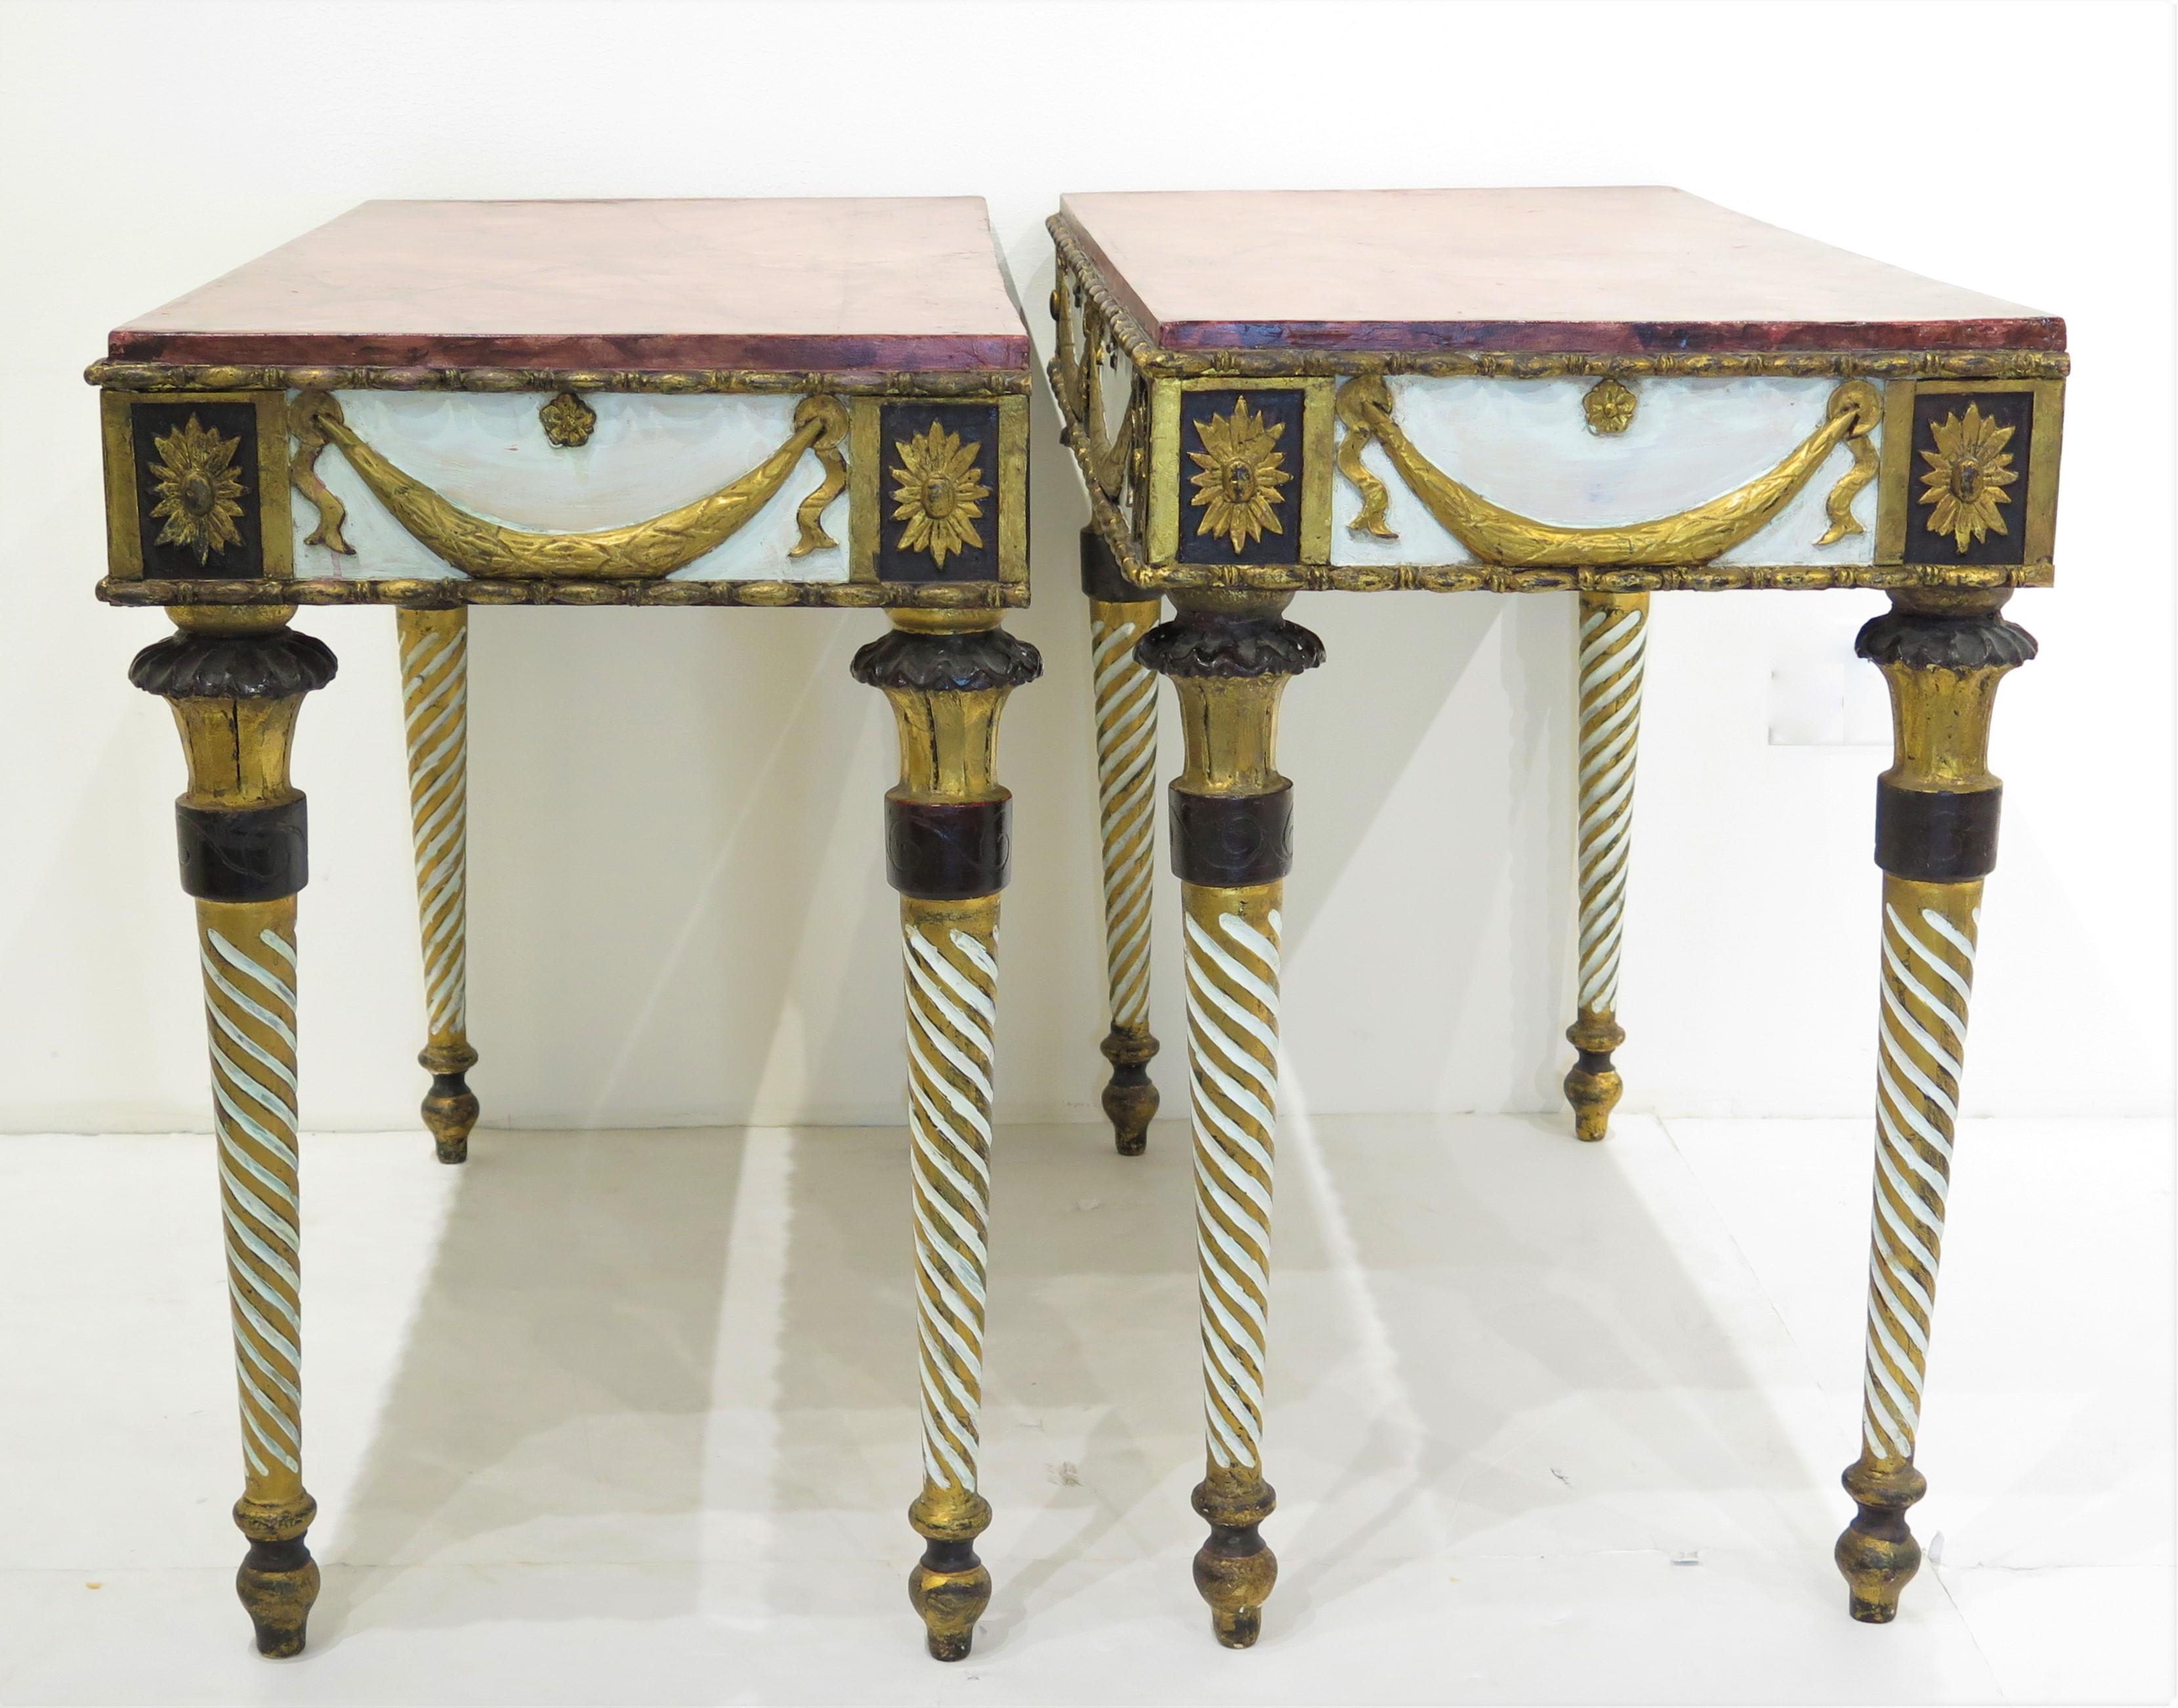 Neoclassical Neoclassic Style Painted Console Tables with Faux Marble Tops For Sale